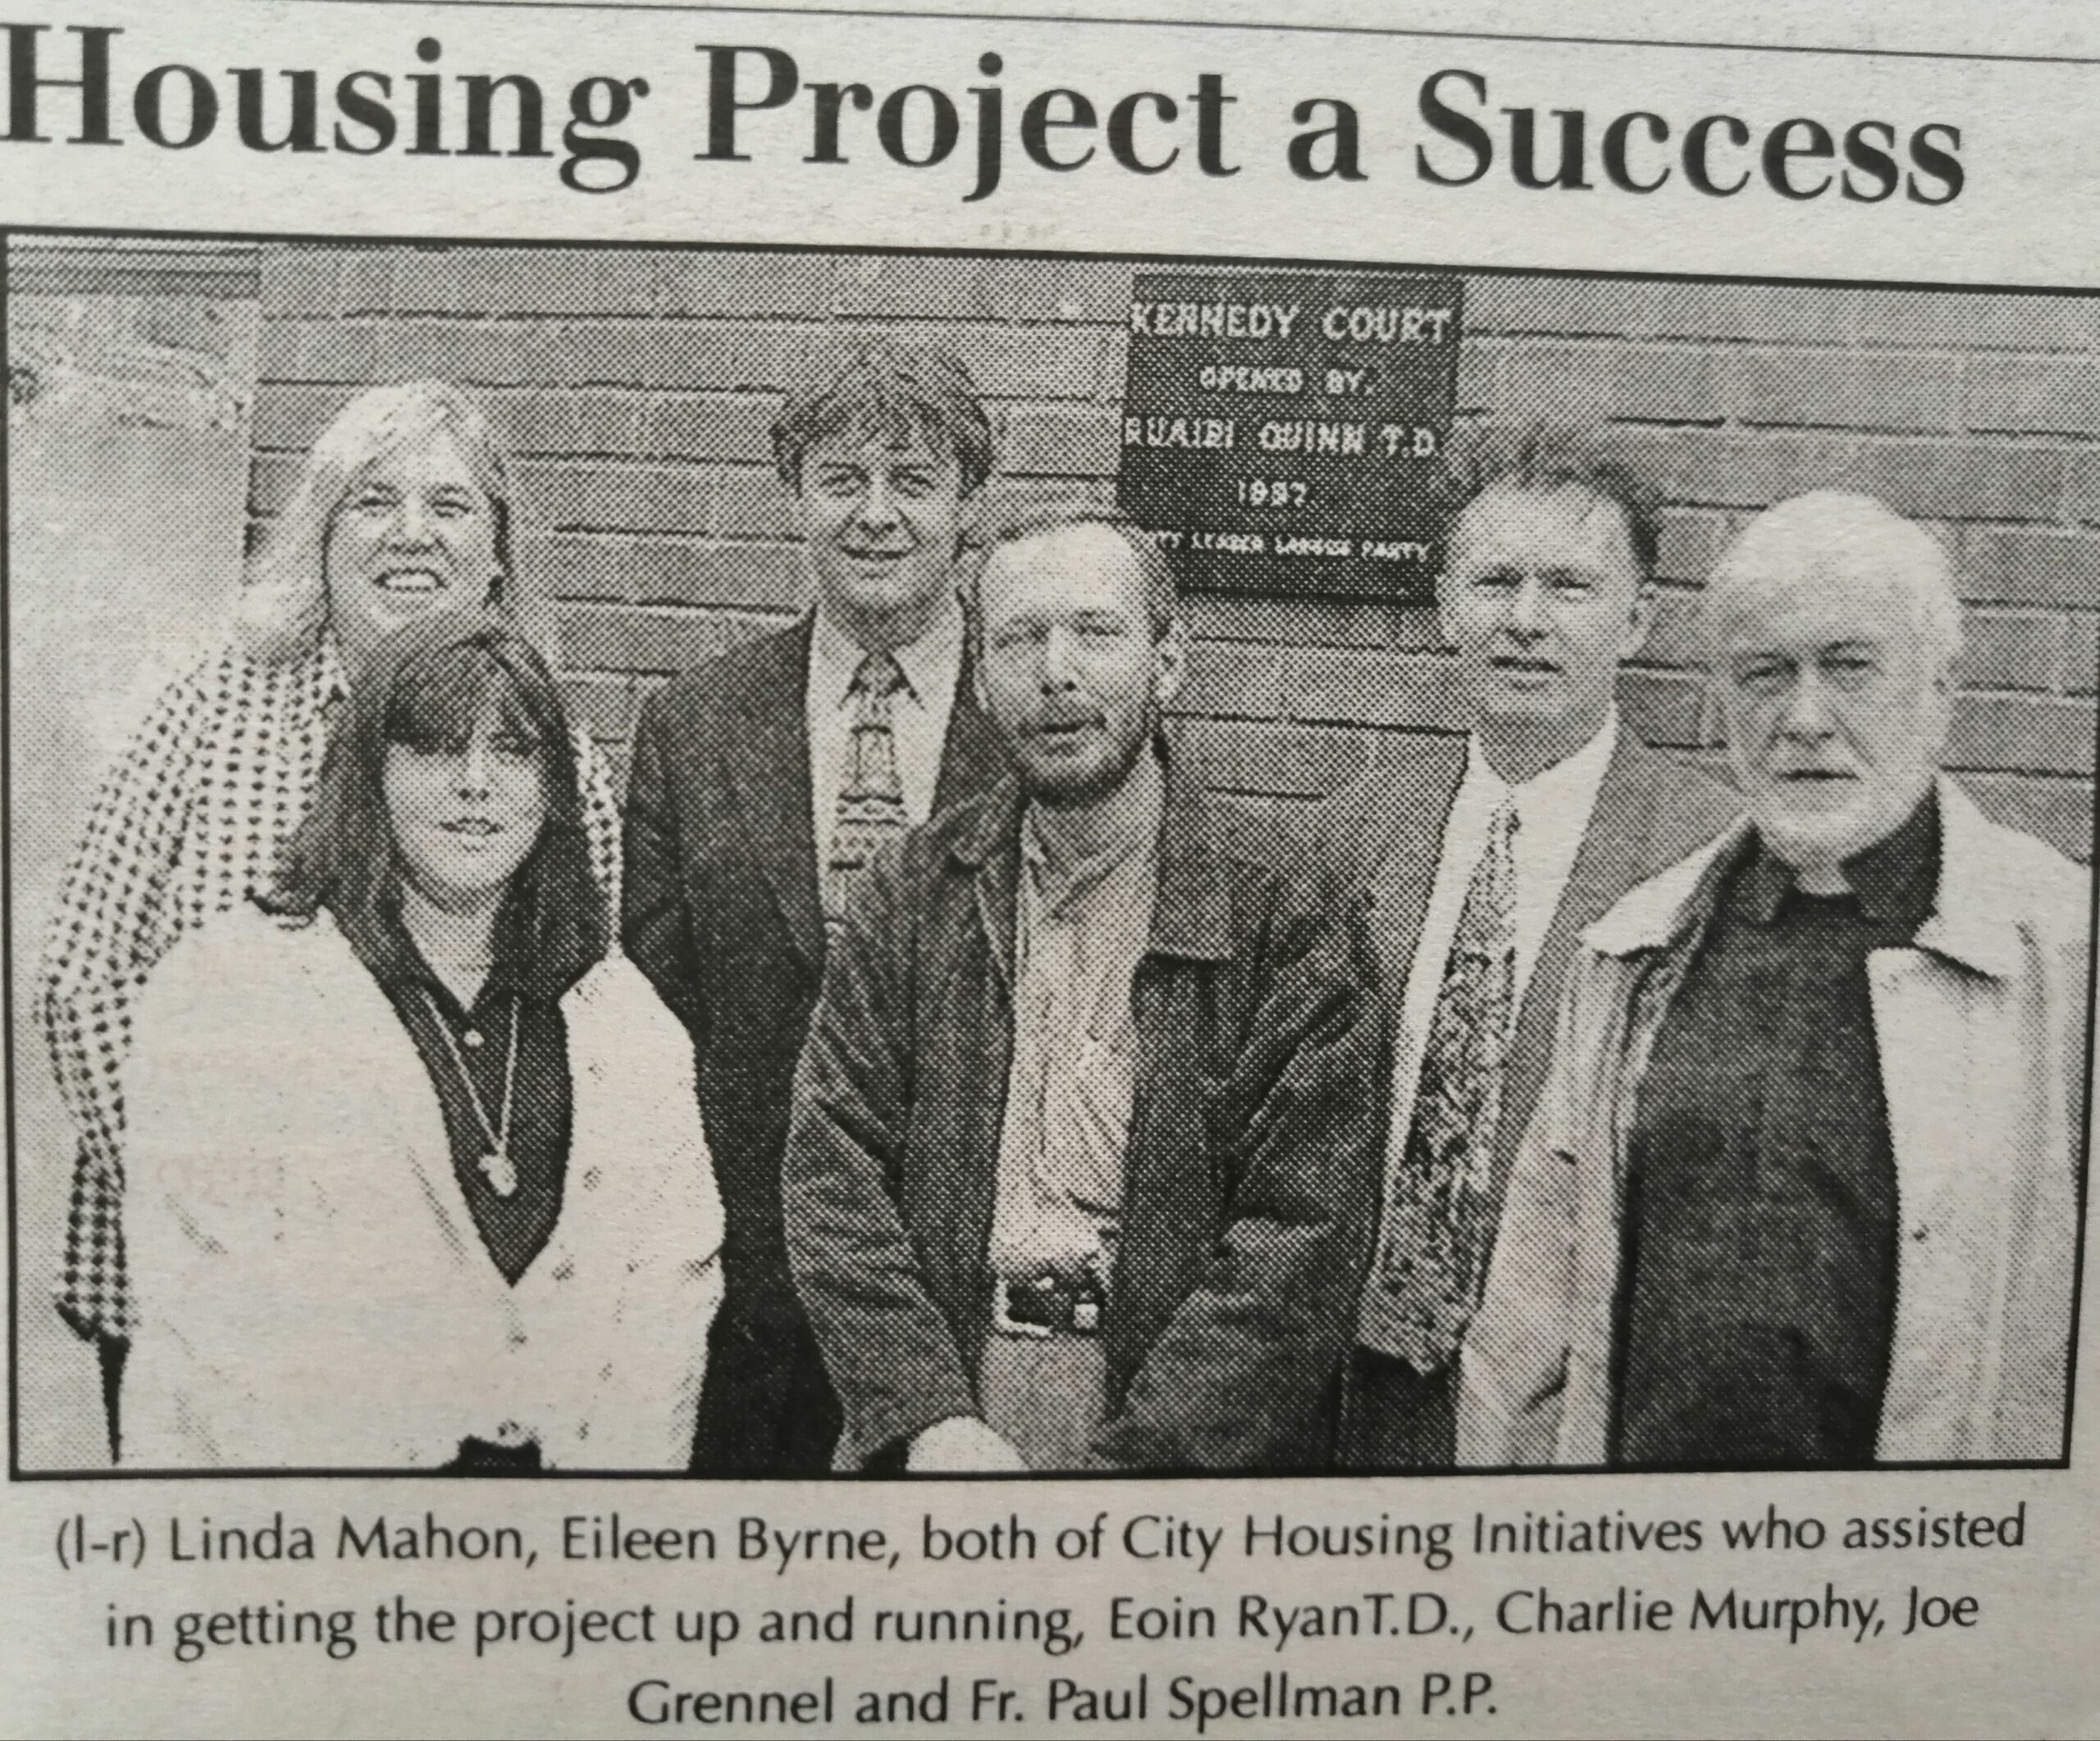 Community Housing Project was a success in 1997